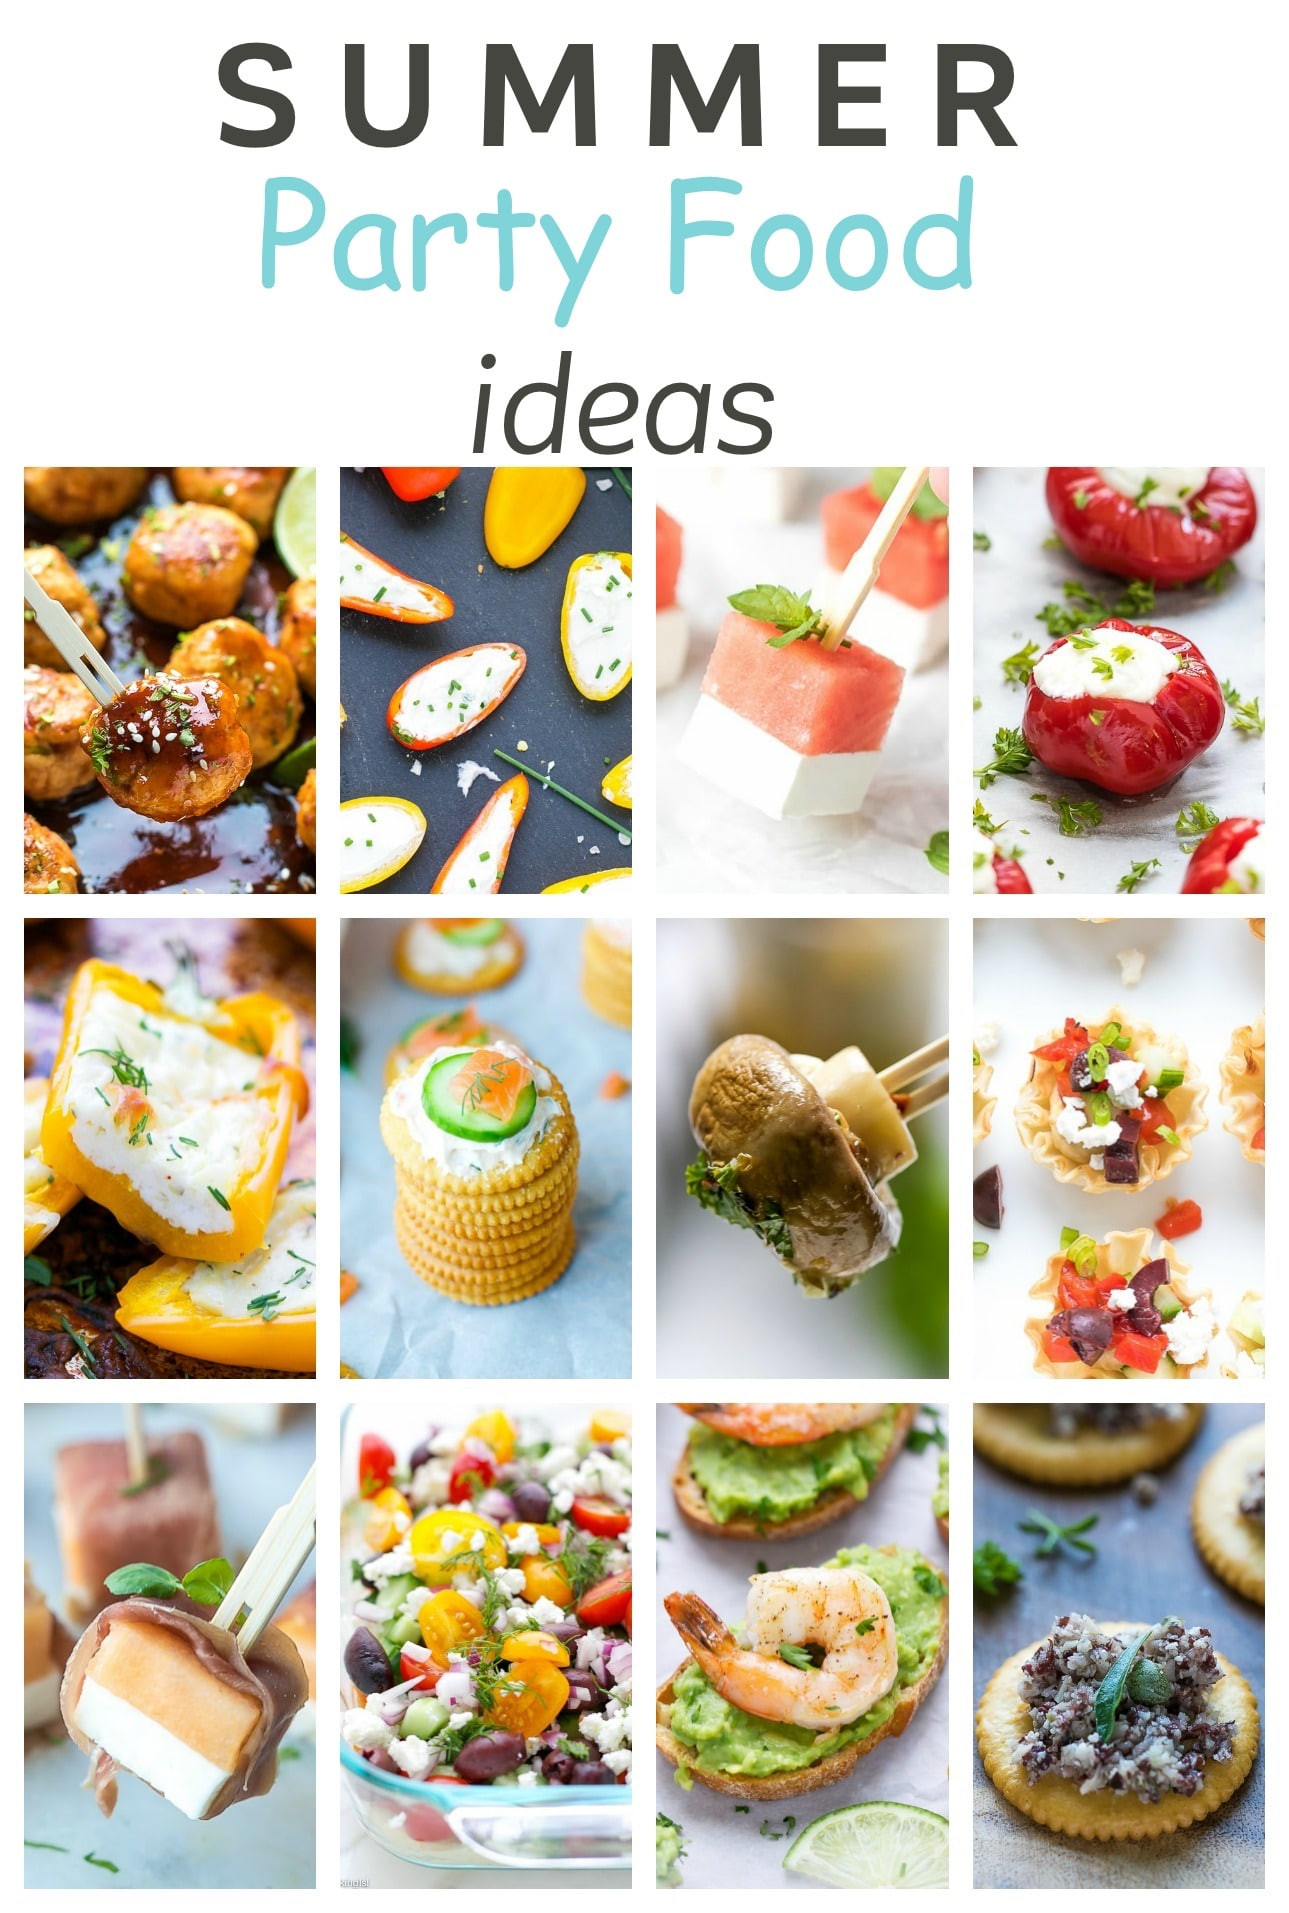 Summer Party Ideas Food
 Easy Summer Party Food Ideas Cooking LSL